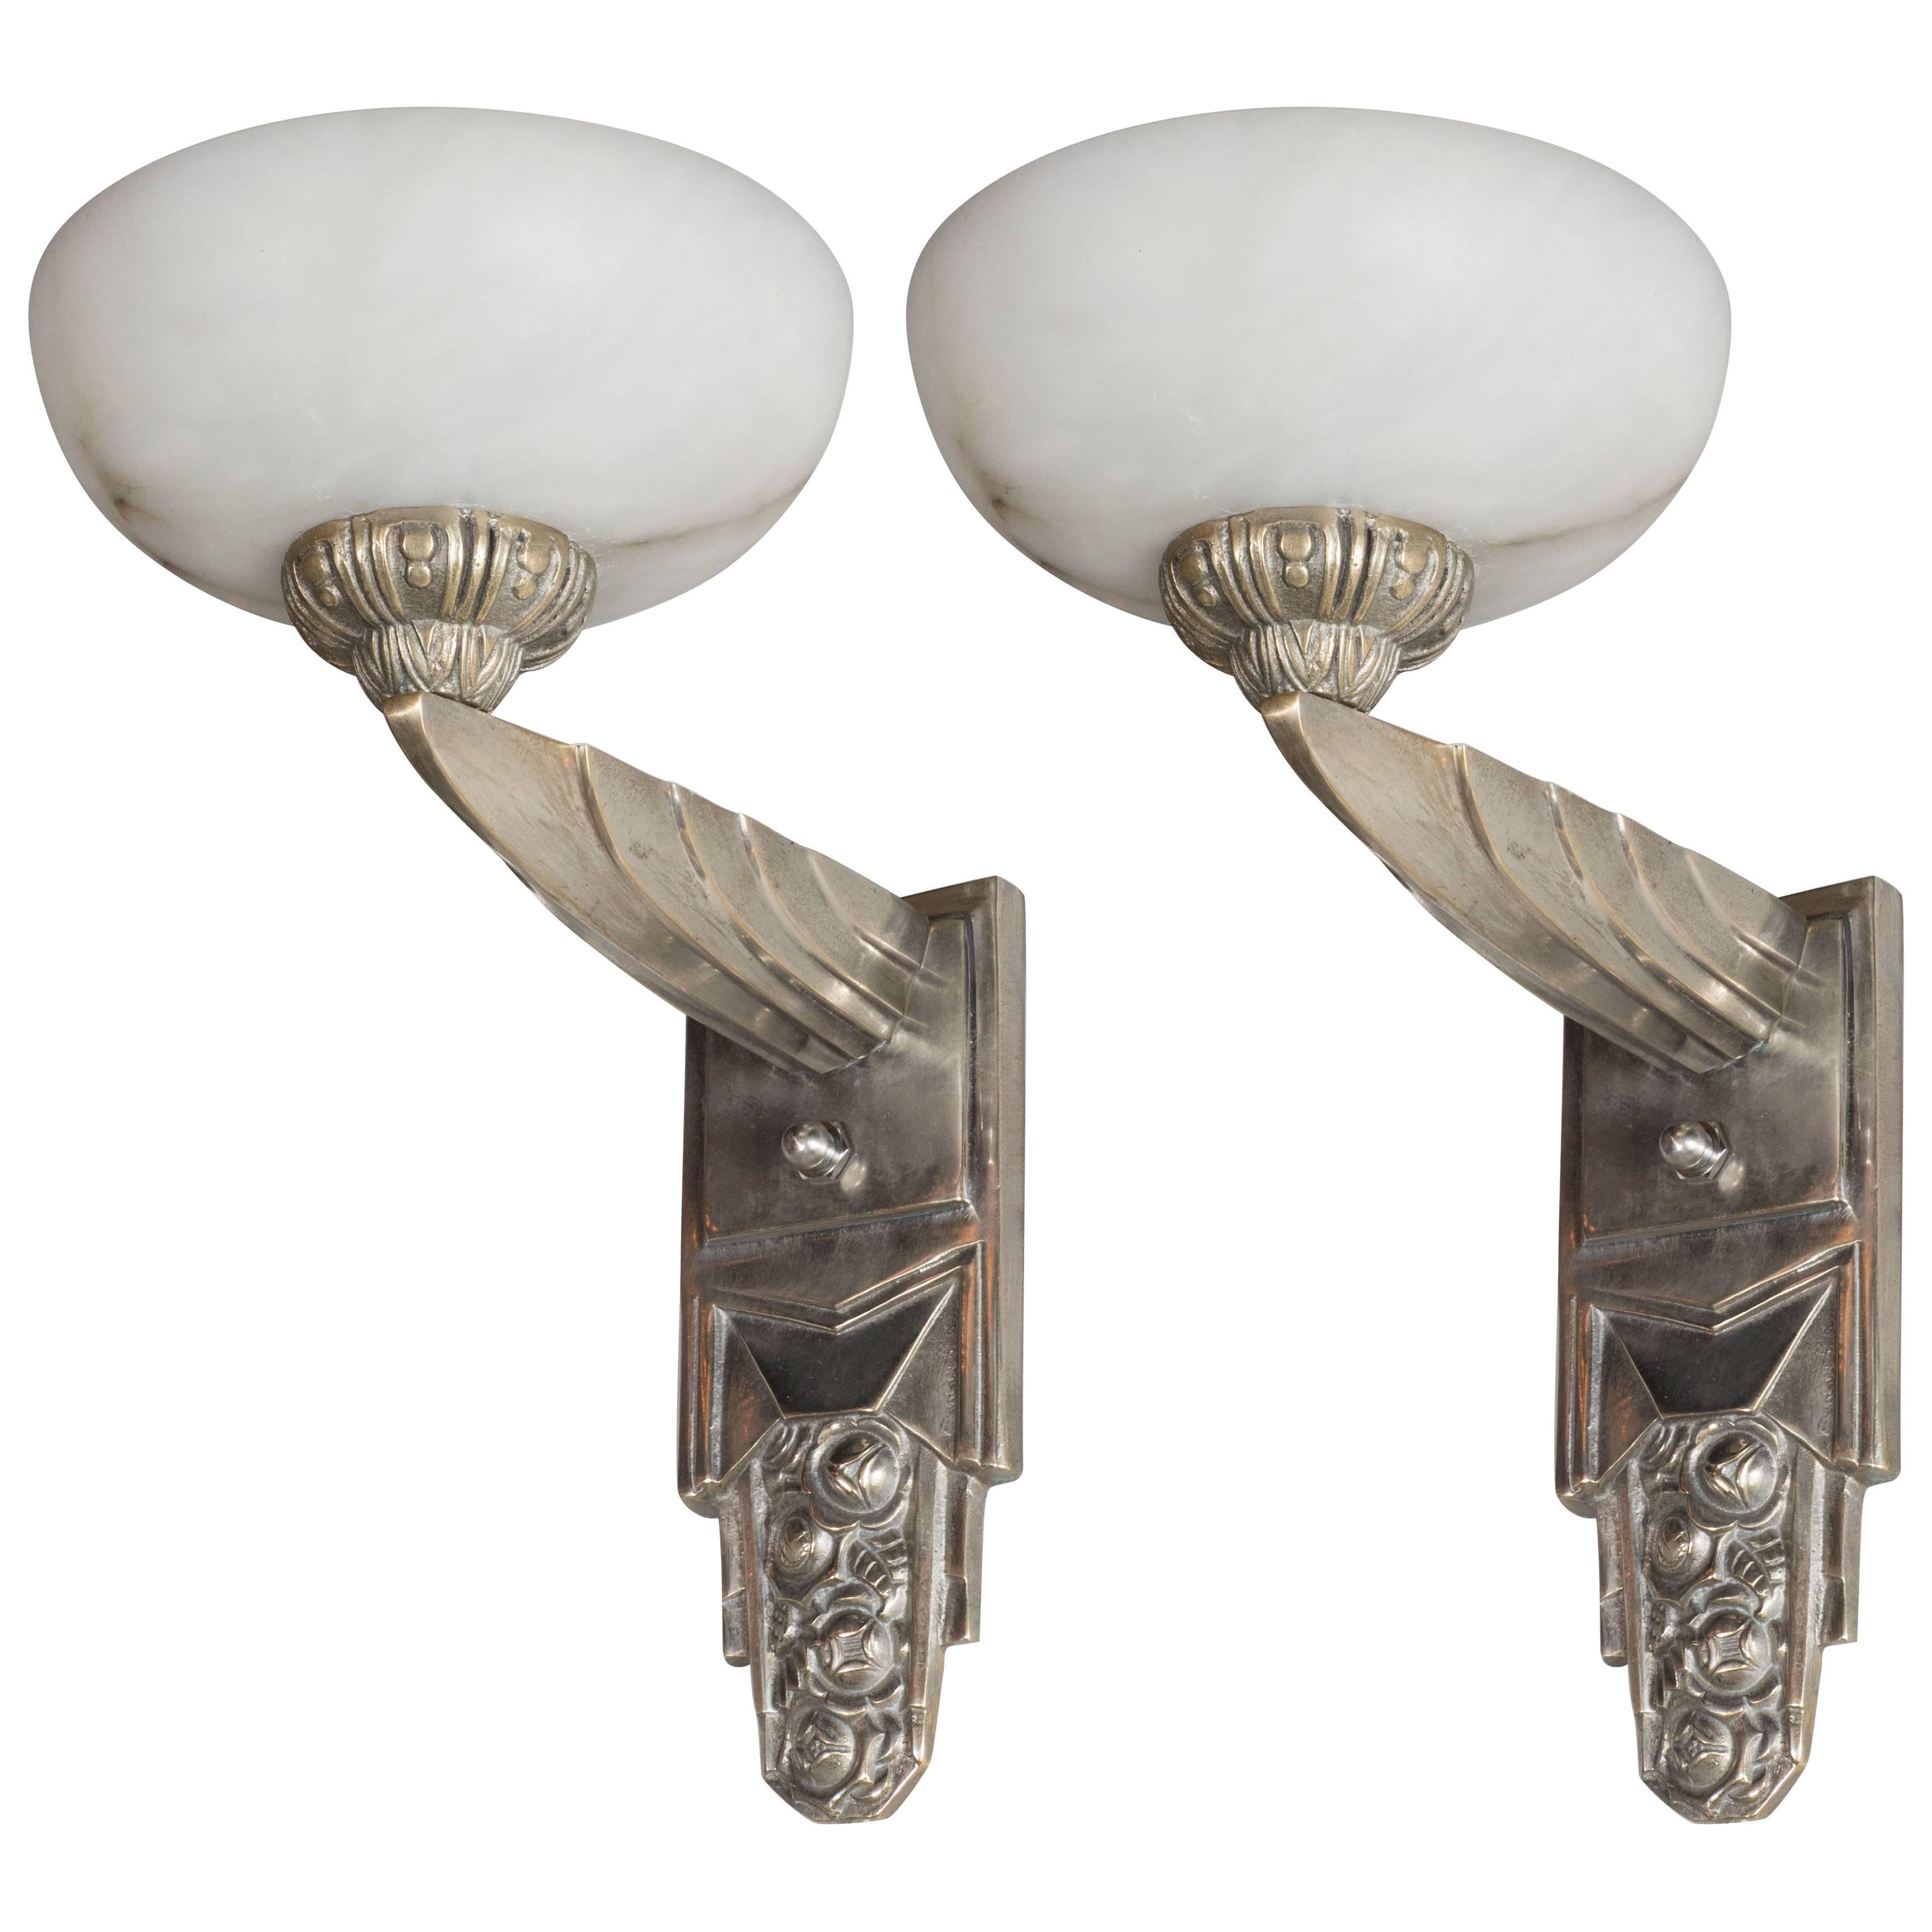 Pair of French Art Deco Skyscraper Sconces in Alabaster and Nickeled Bronze 